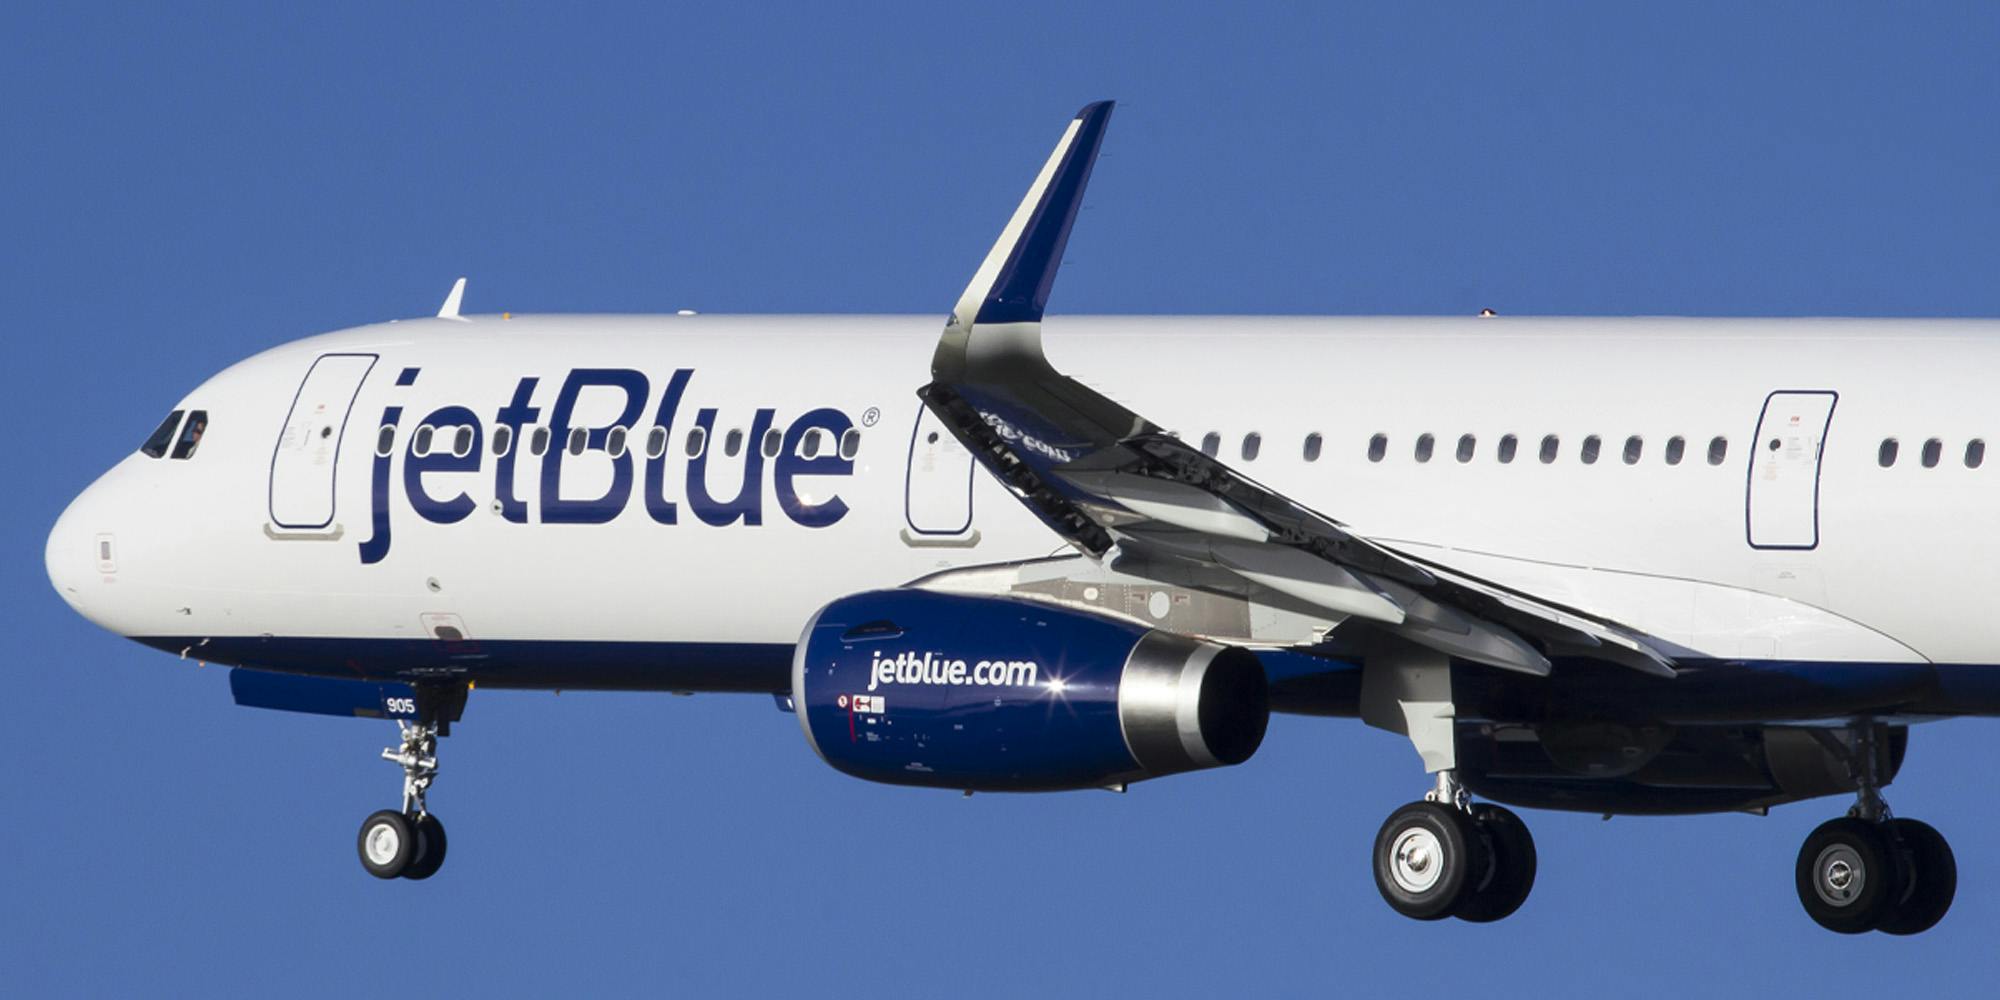 JetBlue airlines plane in blue sky